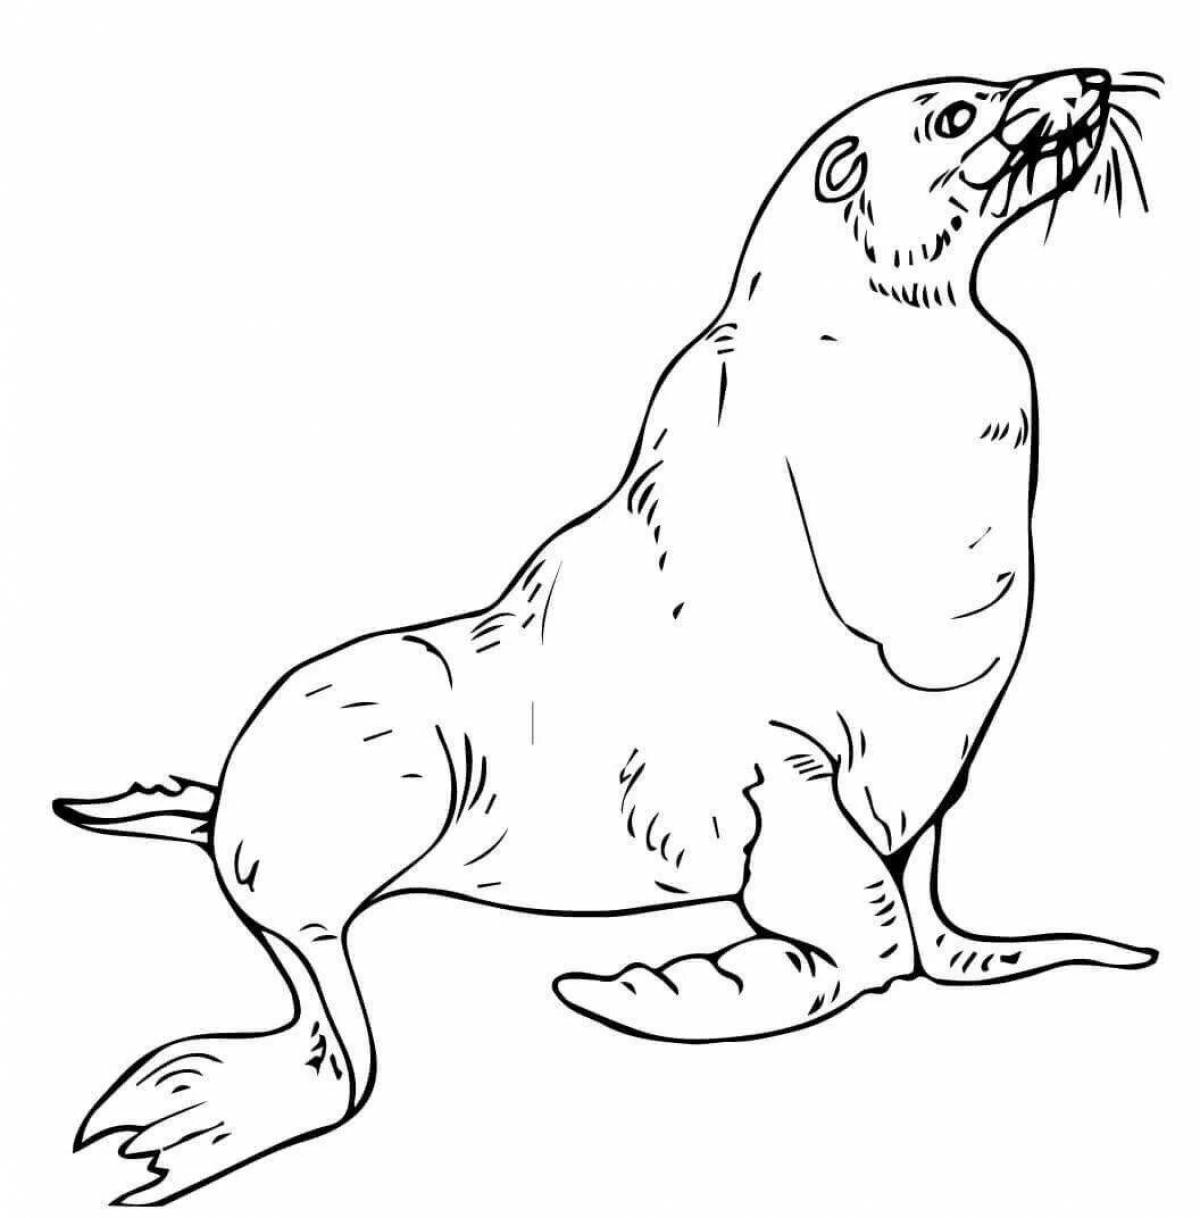 Amazing harbor seal coloring page